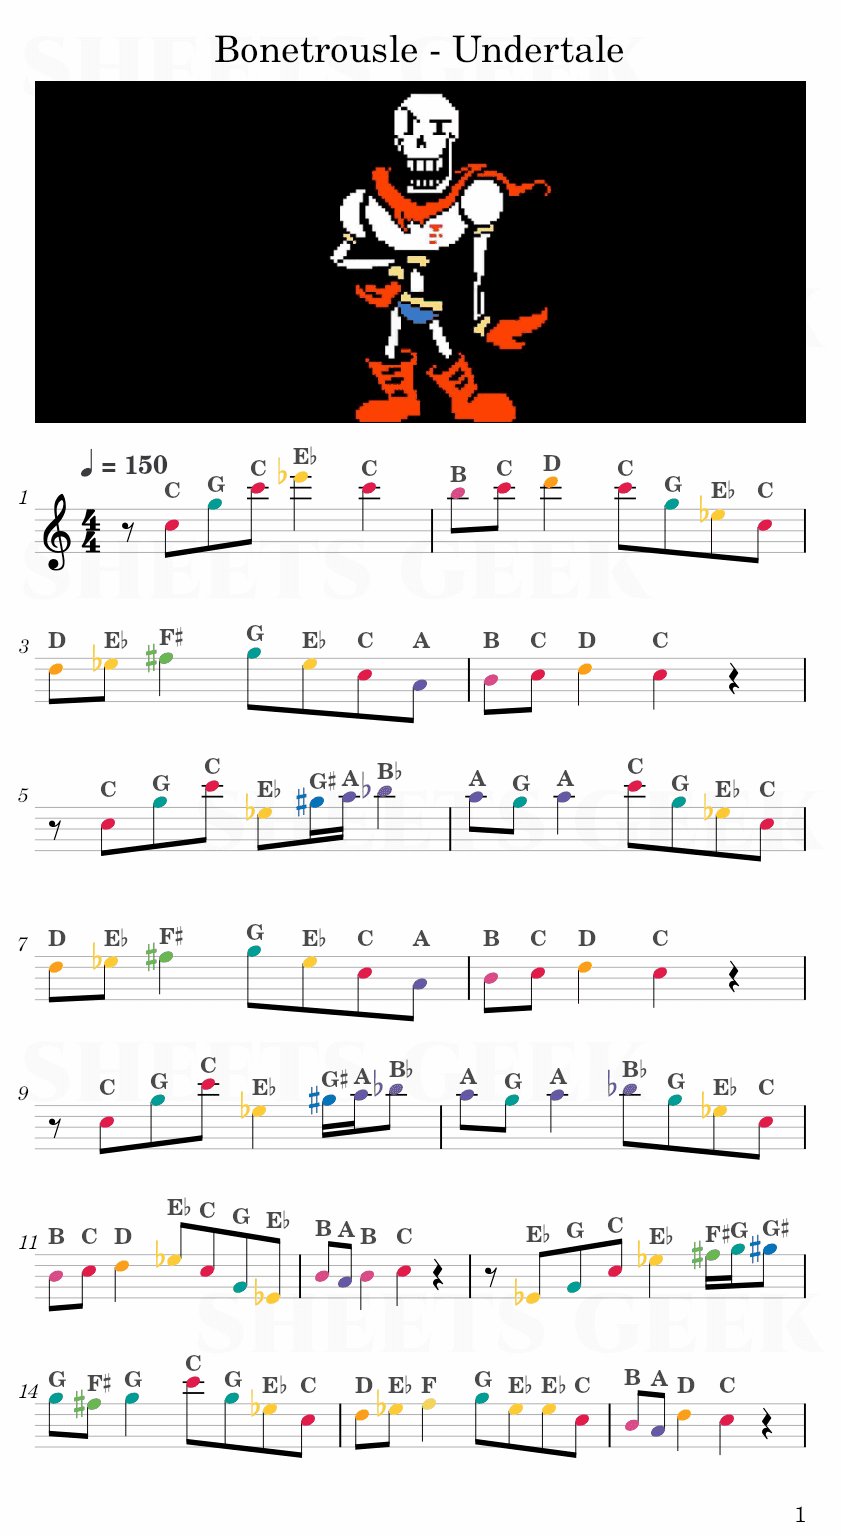 Bonetrousle - Undertale Easy Sheets Music Free for piano, keyboard, flute, violin, sax, celllo 1